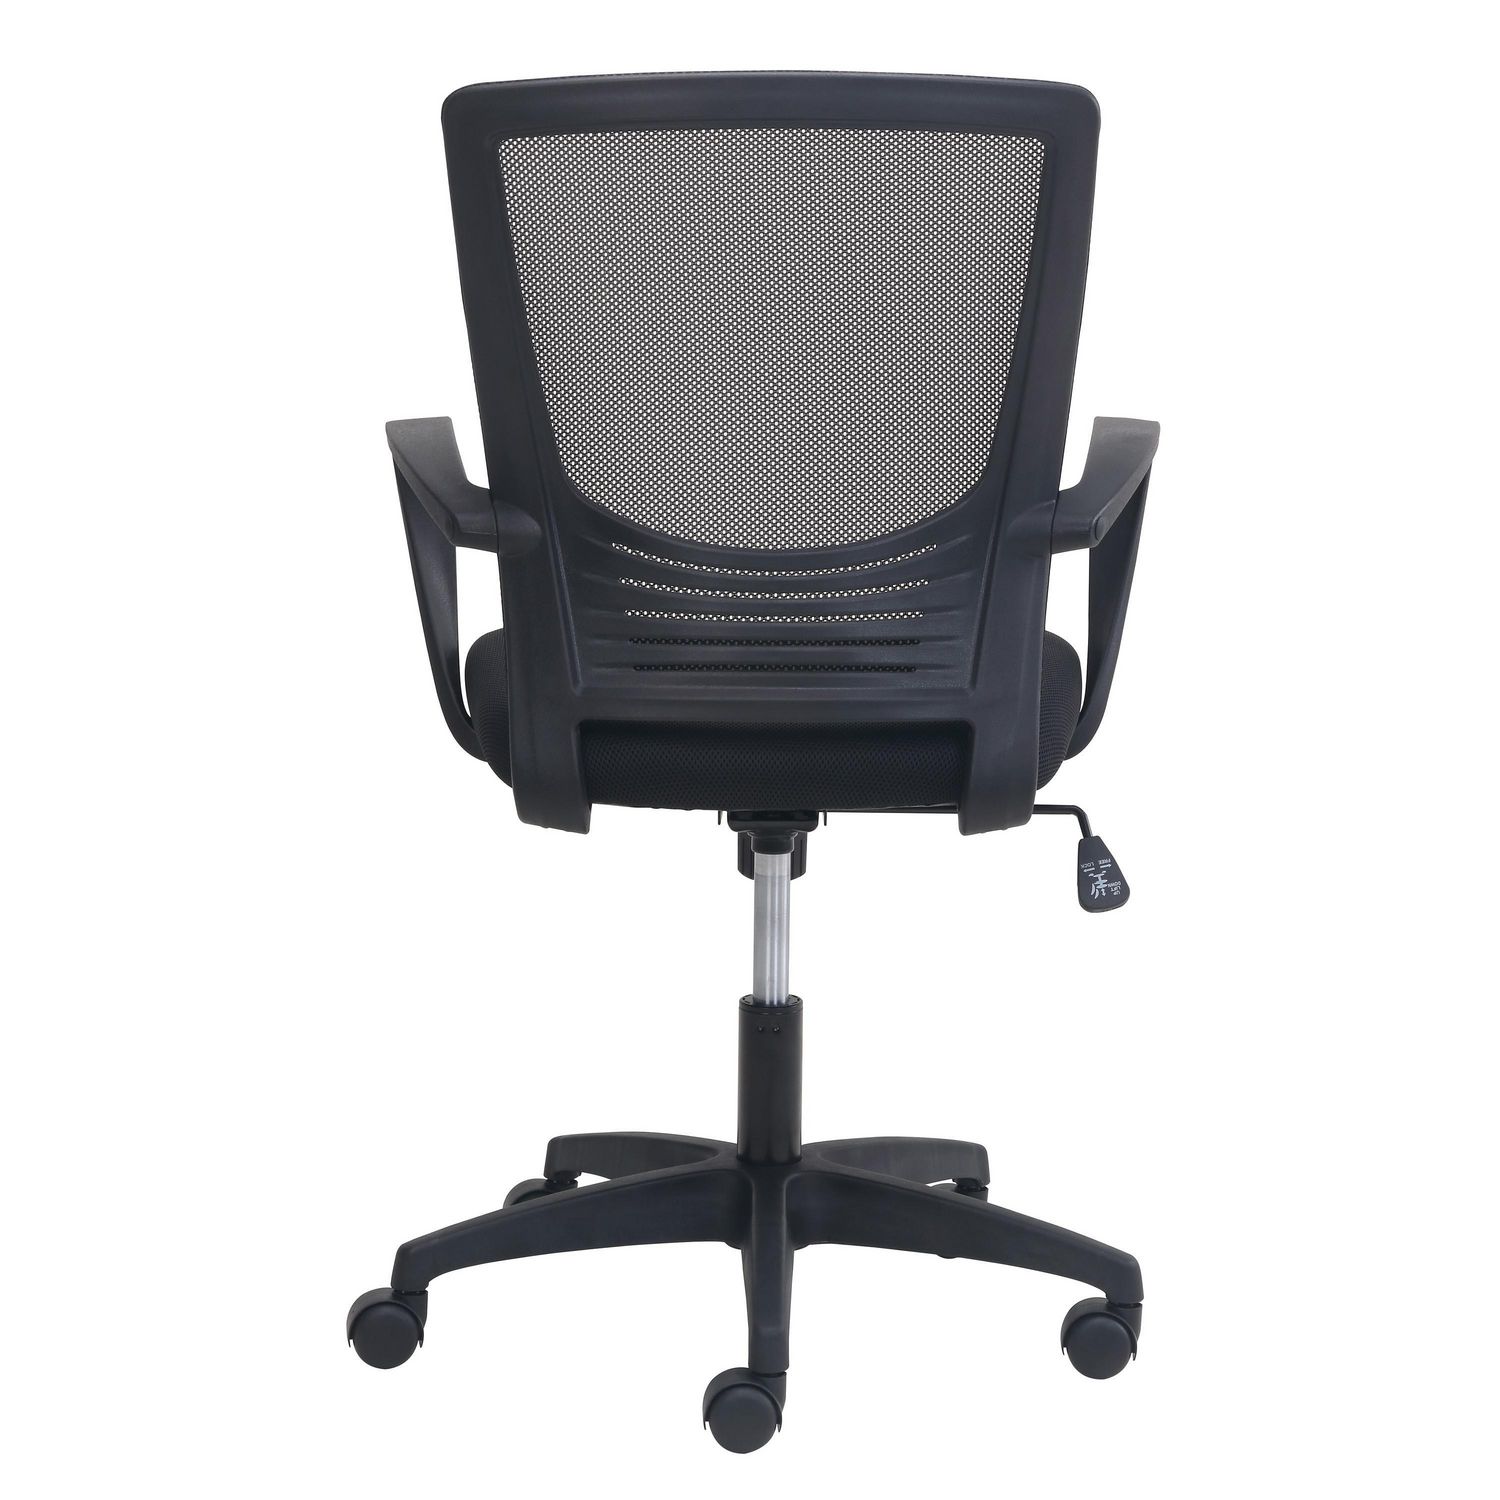 Dandy Mesh-Back Office Chair With Black Seat And Back - Buzz Seating Online